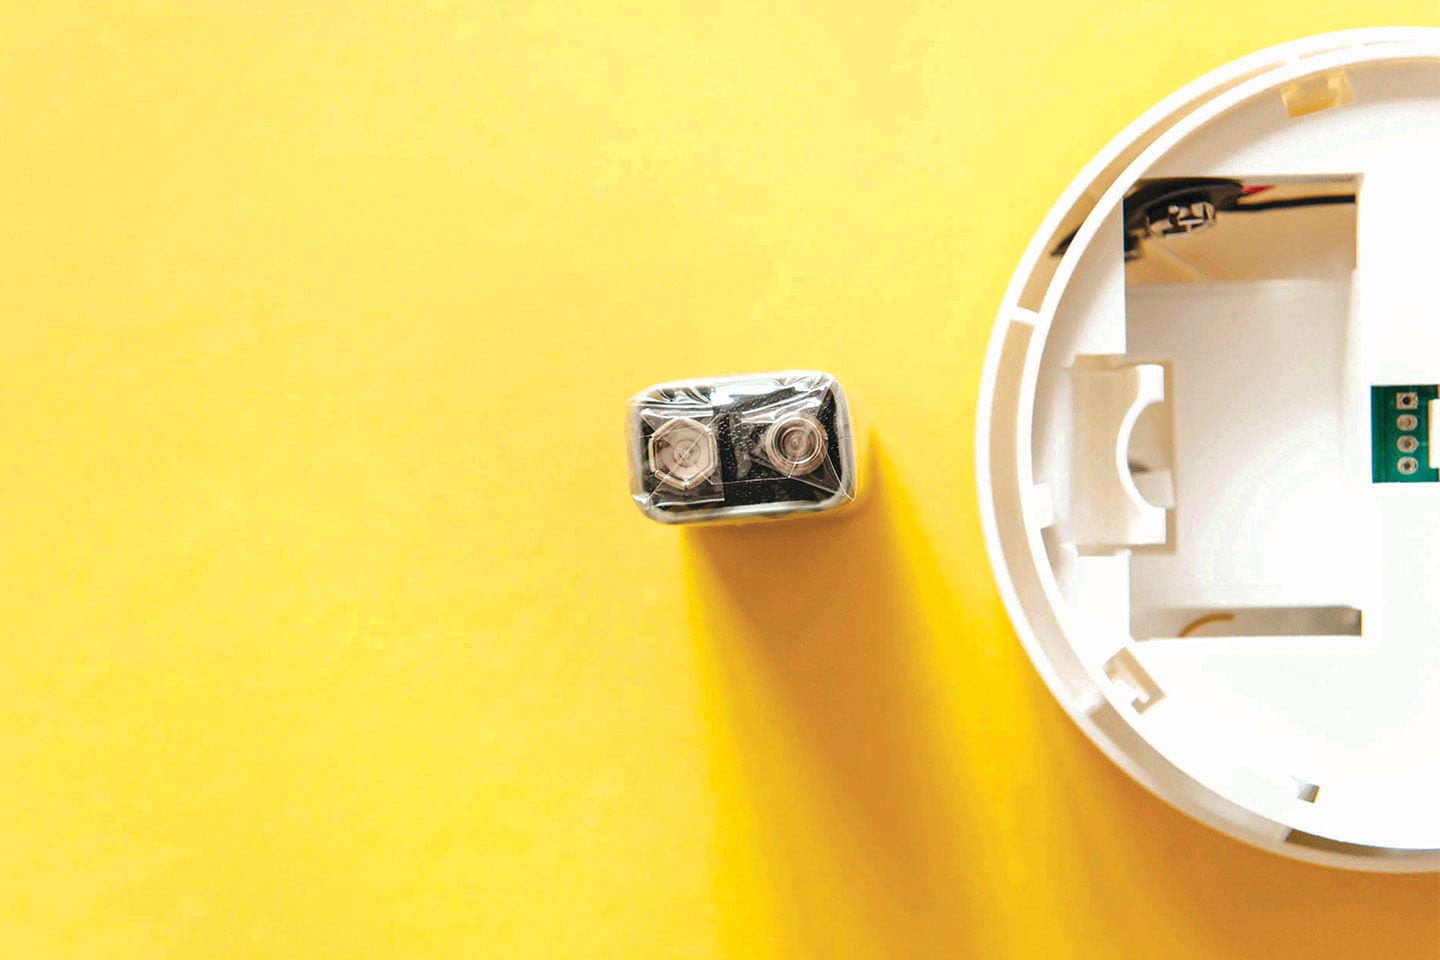 Smoke detector with 9 volt battery sitting next to it on yellow background in chattanooga